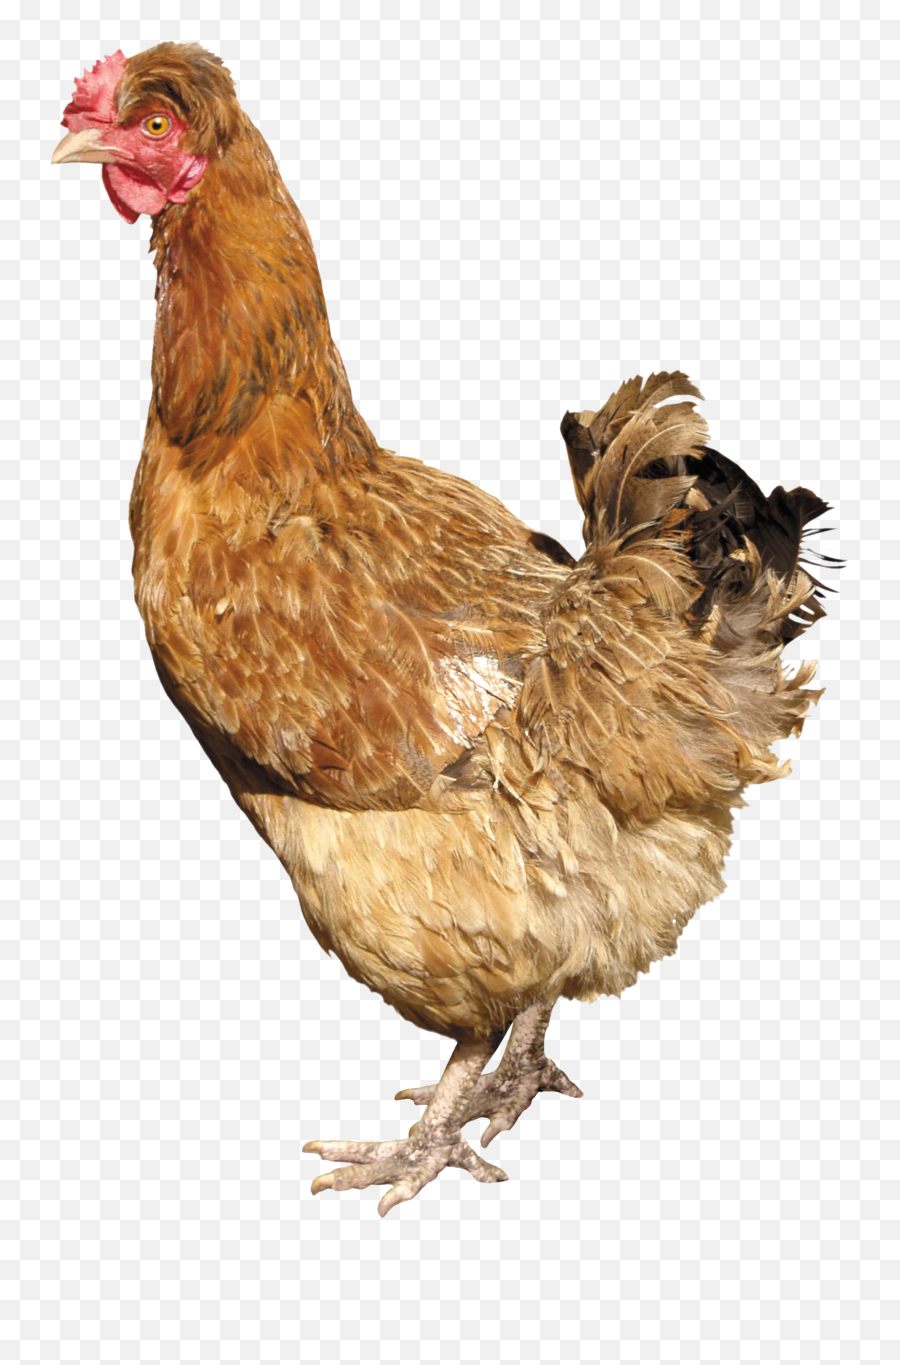 Chicken Png Images Free